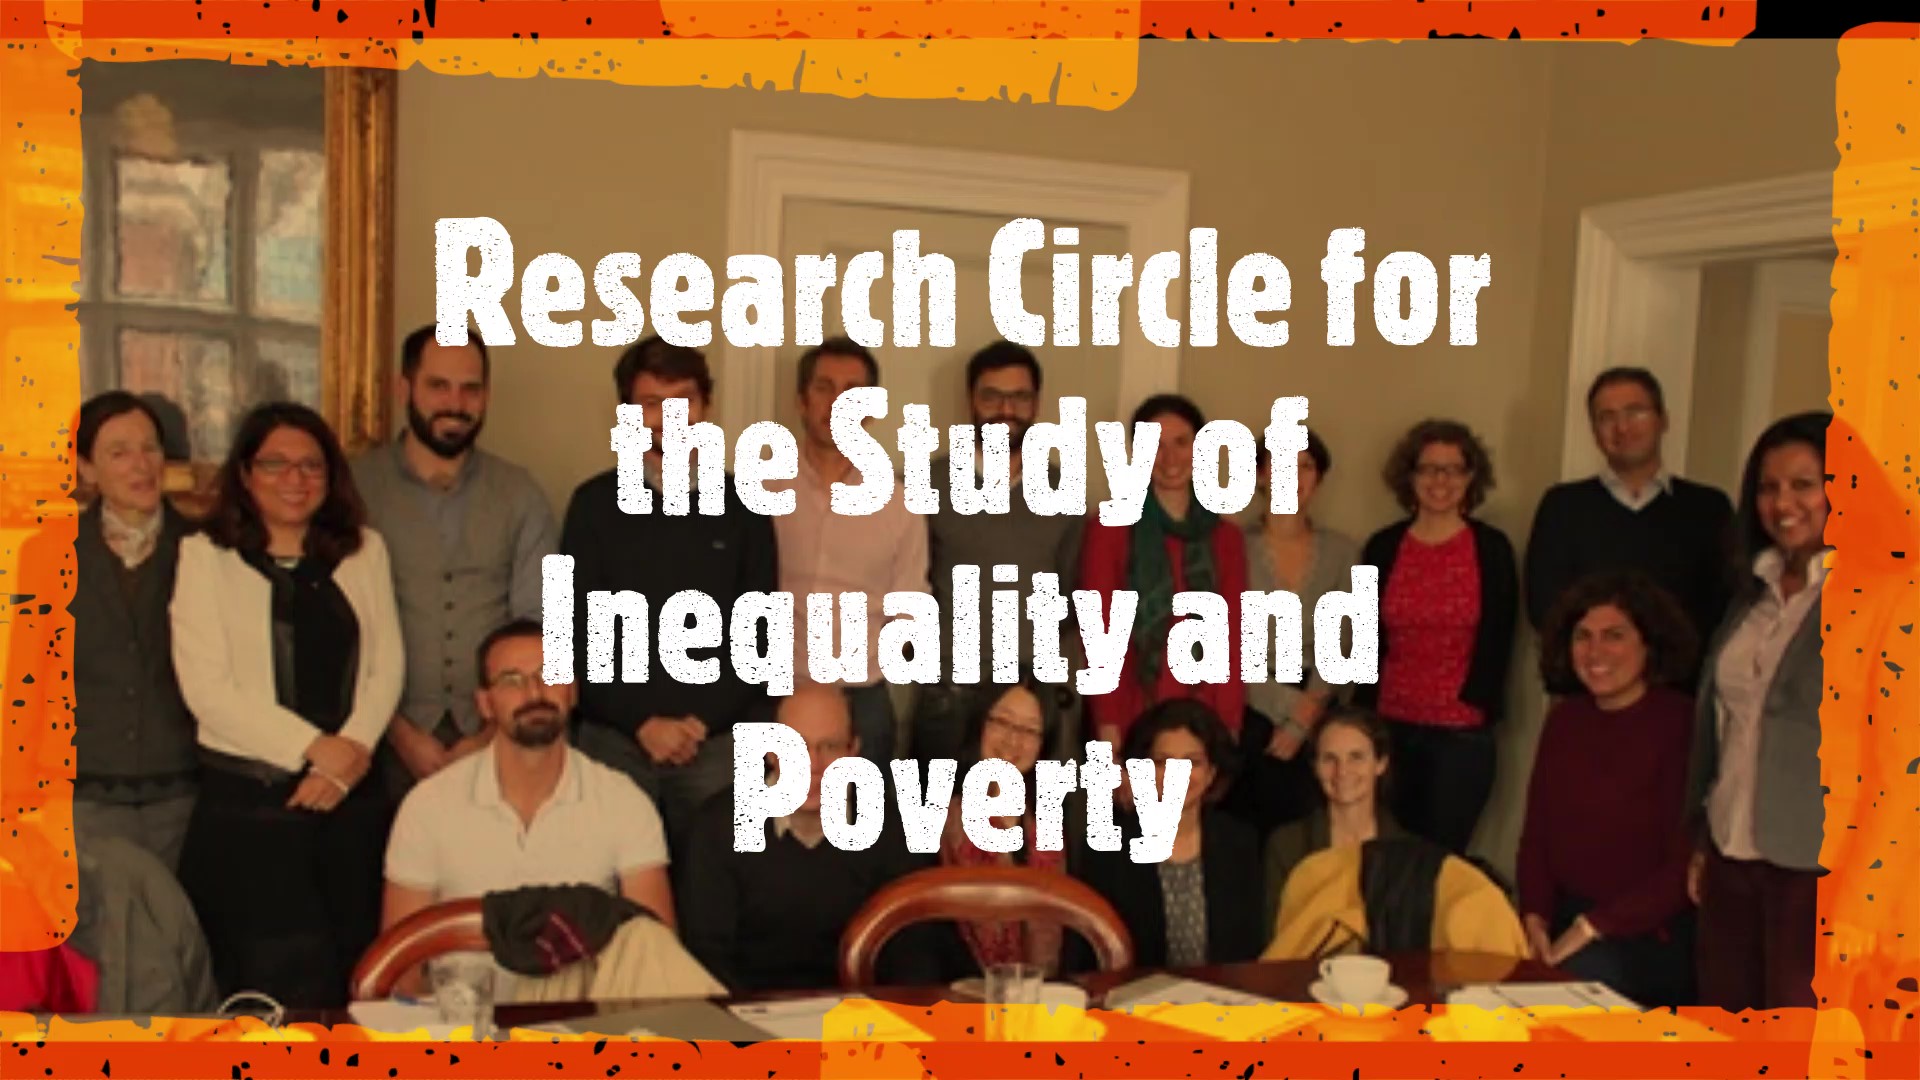 CGR workshop: Measuring the Effects of Covid-19 on Poverty, Inequality and Mobility